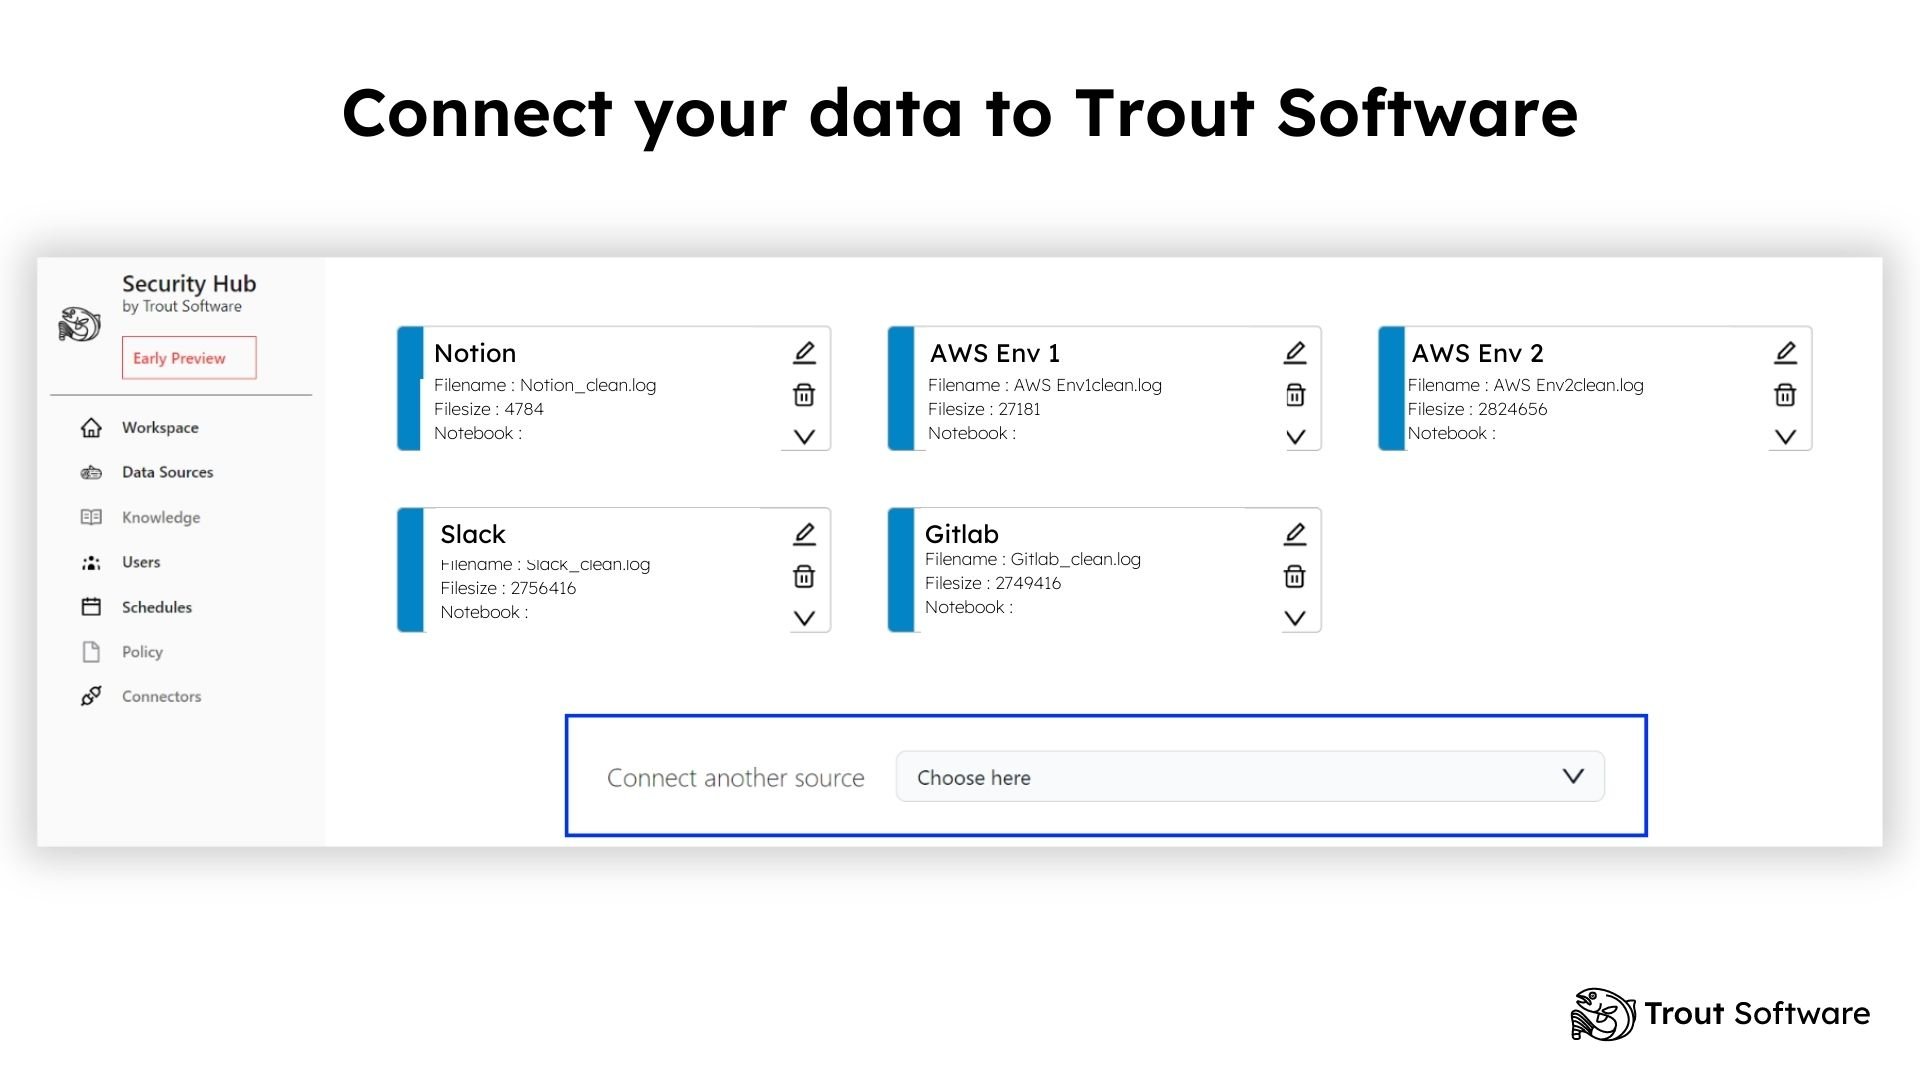 connect your data to Trout Software (1)